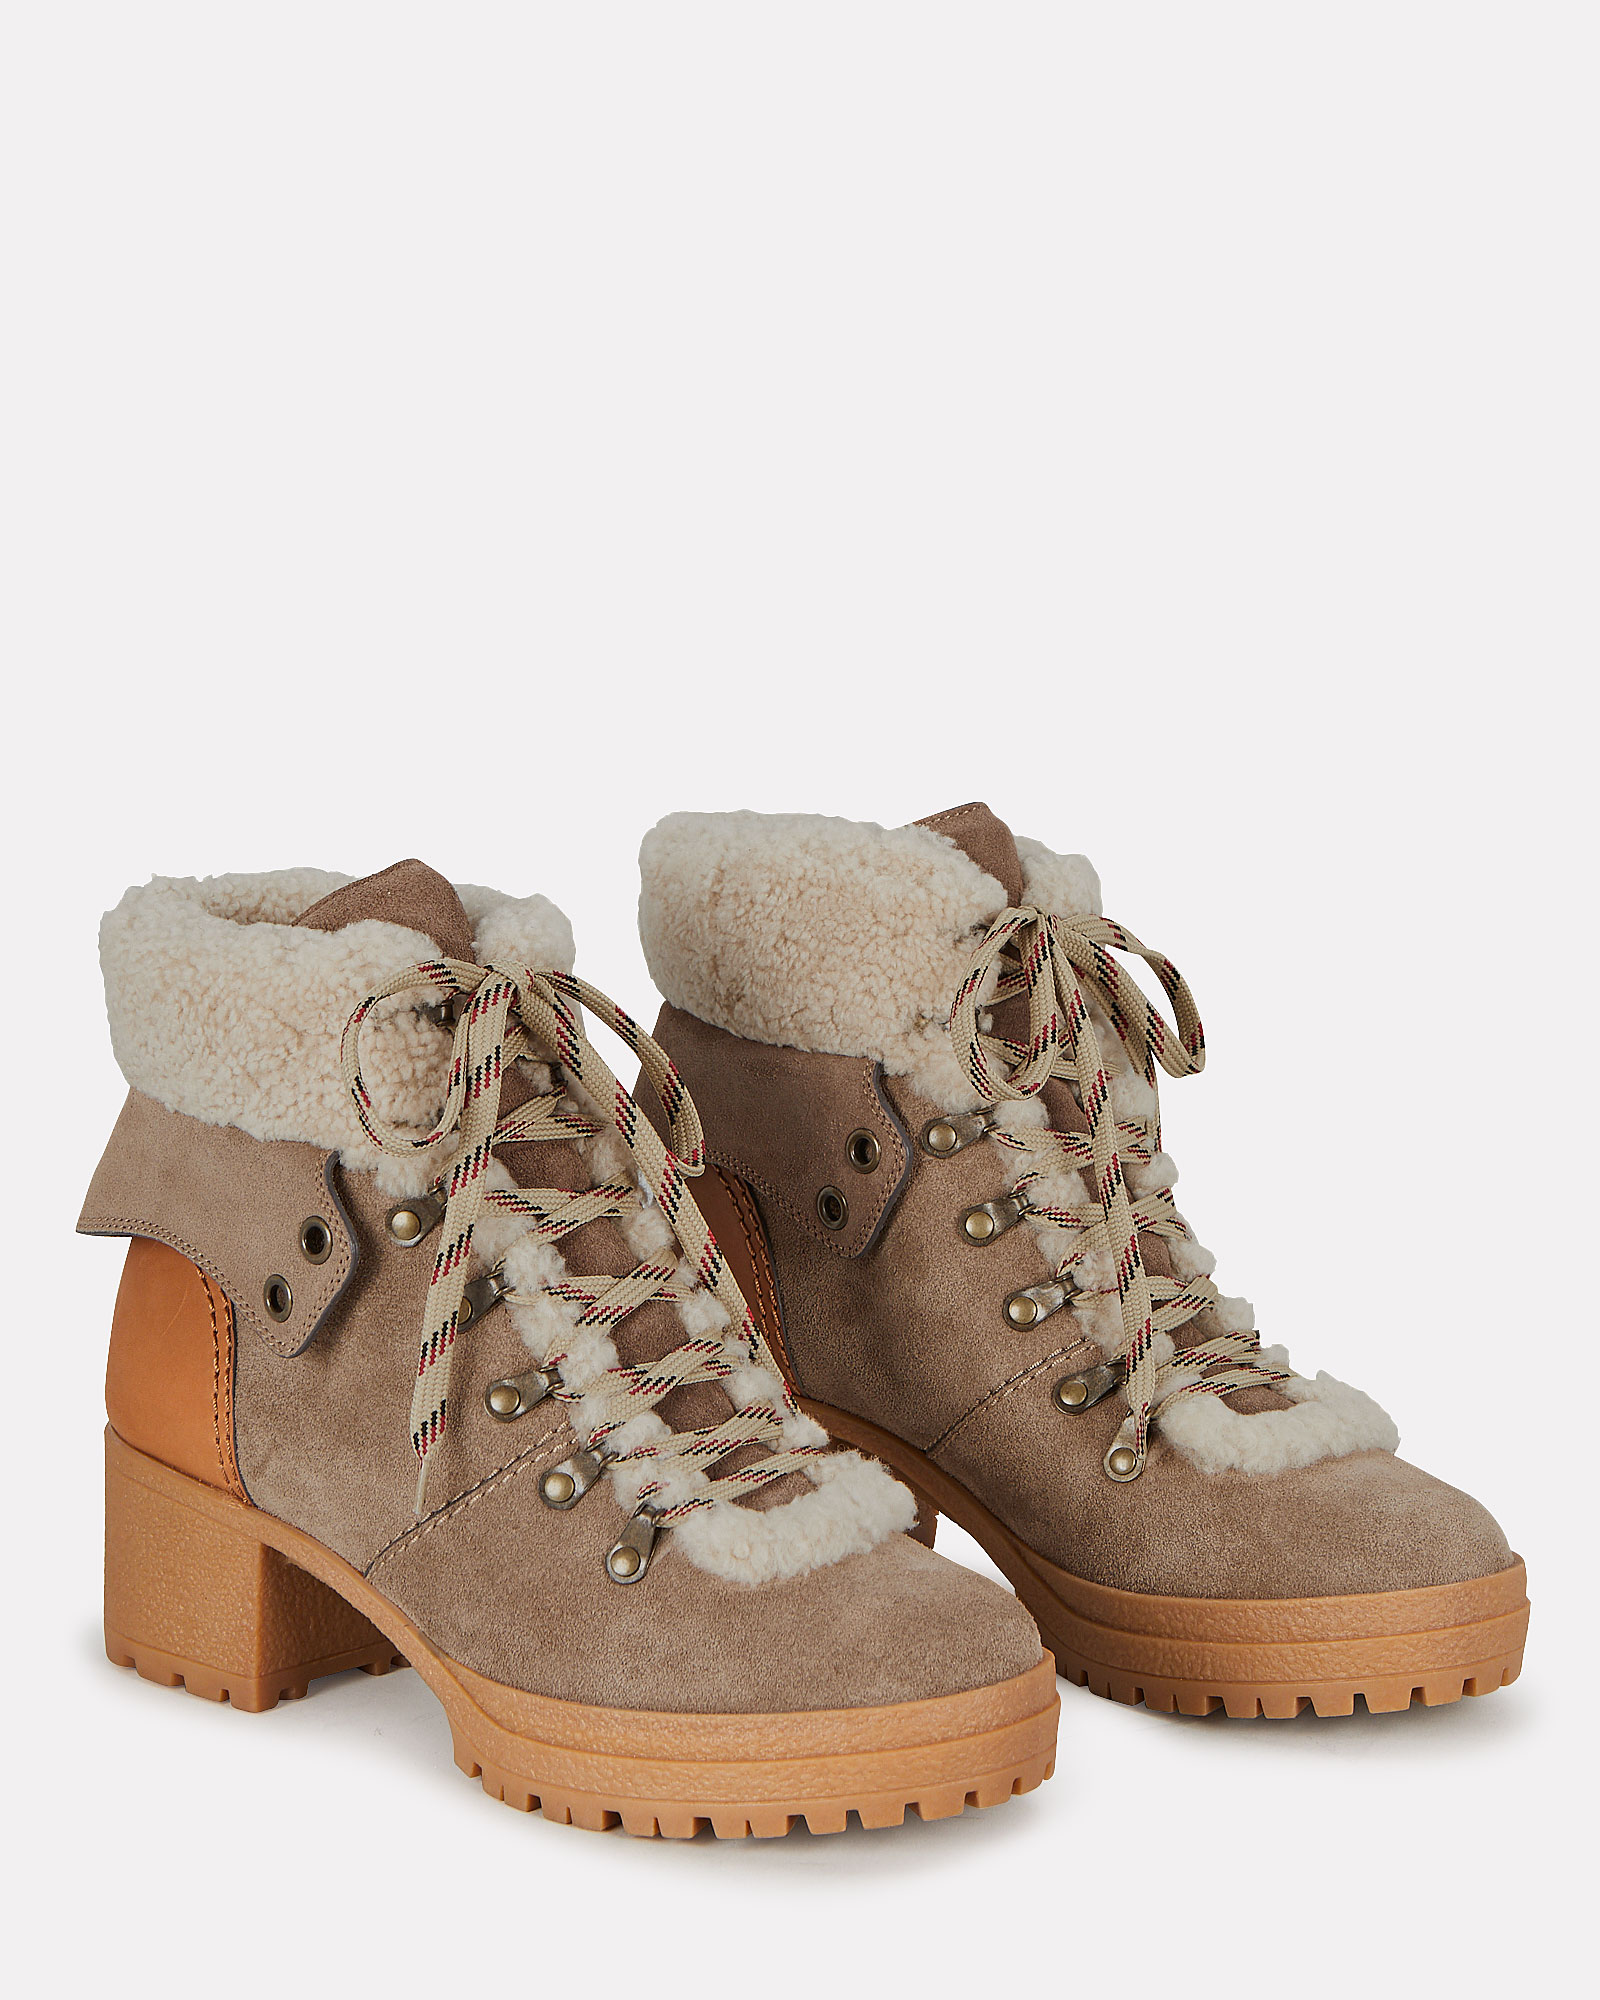 Shearling Lace-Up Hiker Booties